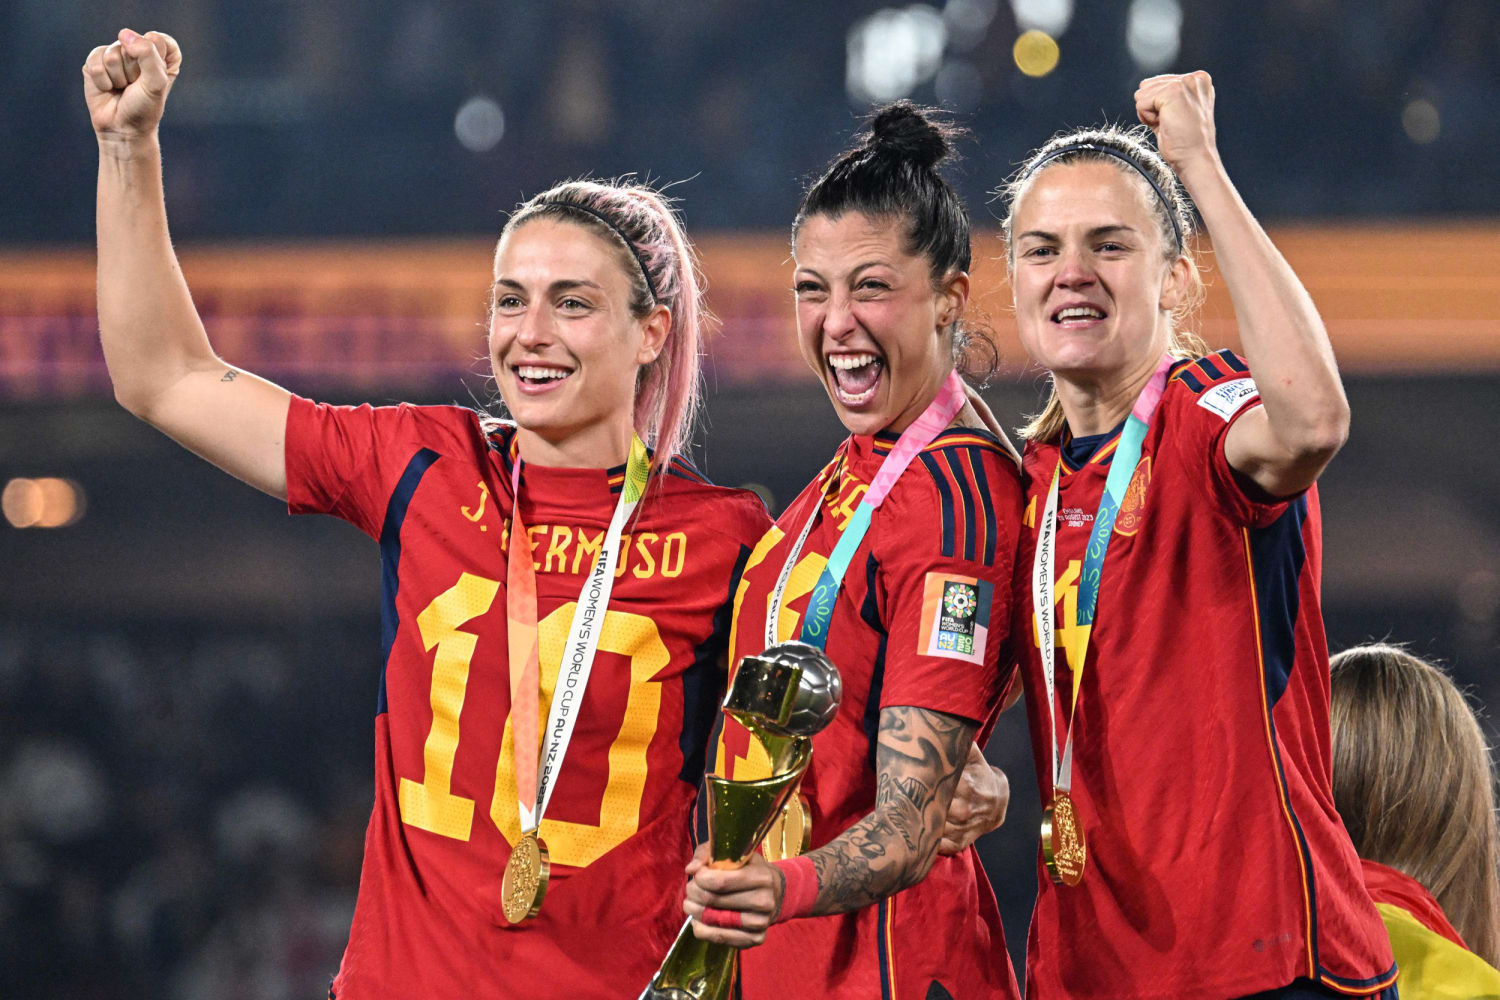 Spains women players to end boycott after football federation commits to change